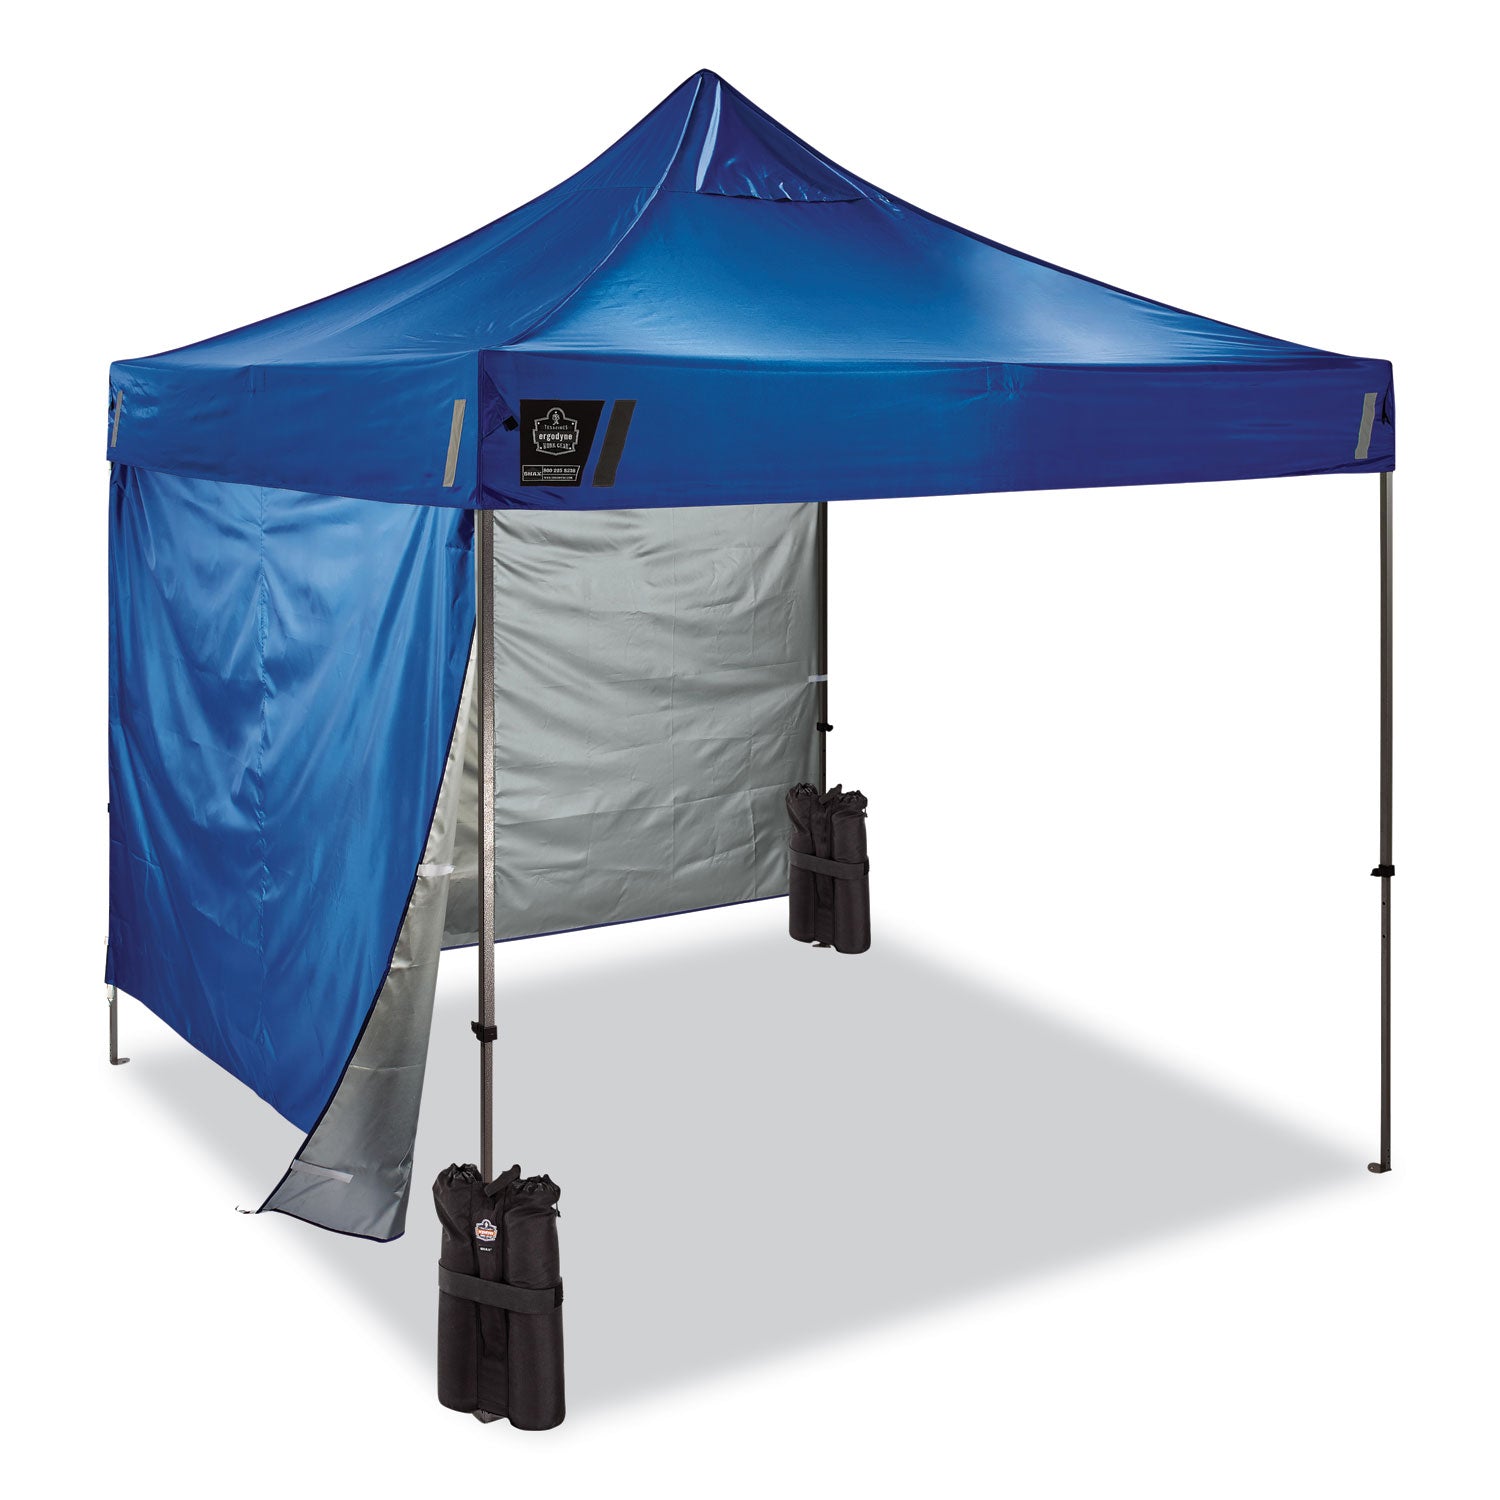 shax-6051-heavy-duty-pop-up-tent-kit-single-skin-10-ft-x-10-ft-polyester-steel-blue-ships-in-1-3-business-days_ego12952 - 1